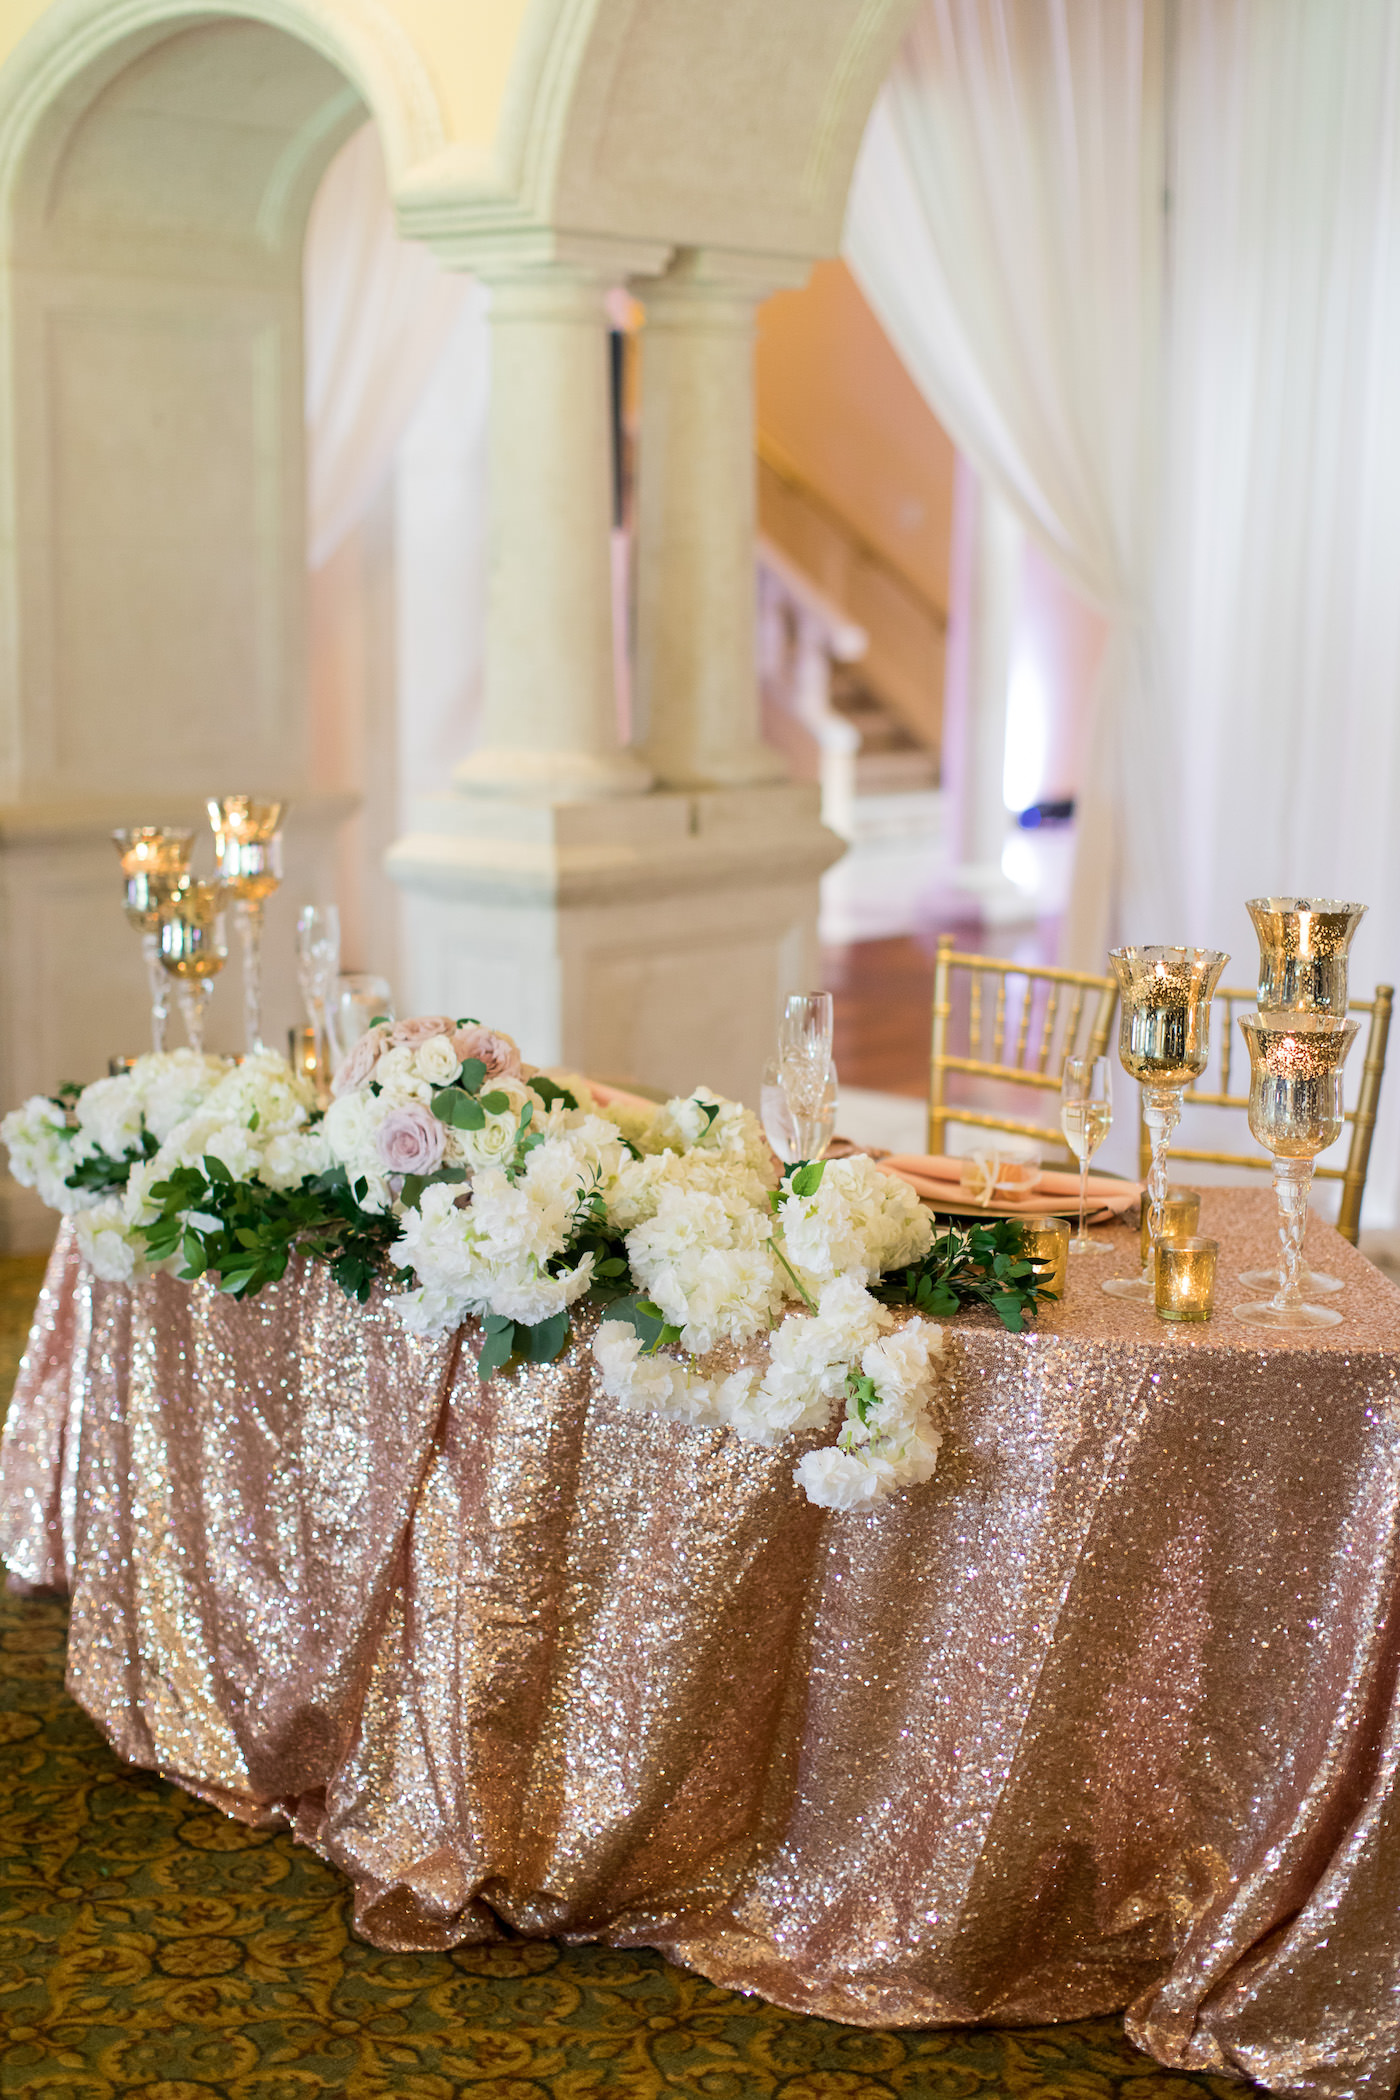 Tampa Wedding Sweetheart Table with Blush Pink Rose Gold Sequin Table Linen and Gold Mercury Candles with Ivory Hydrangea Floral Arrangement